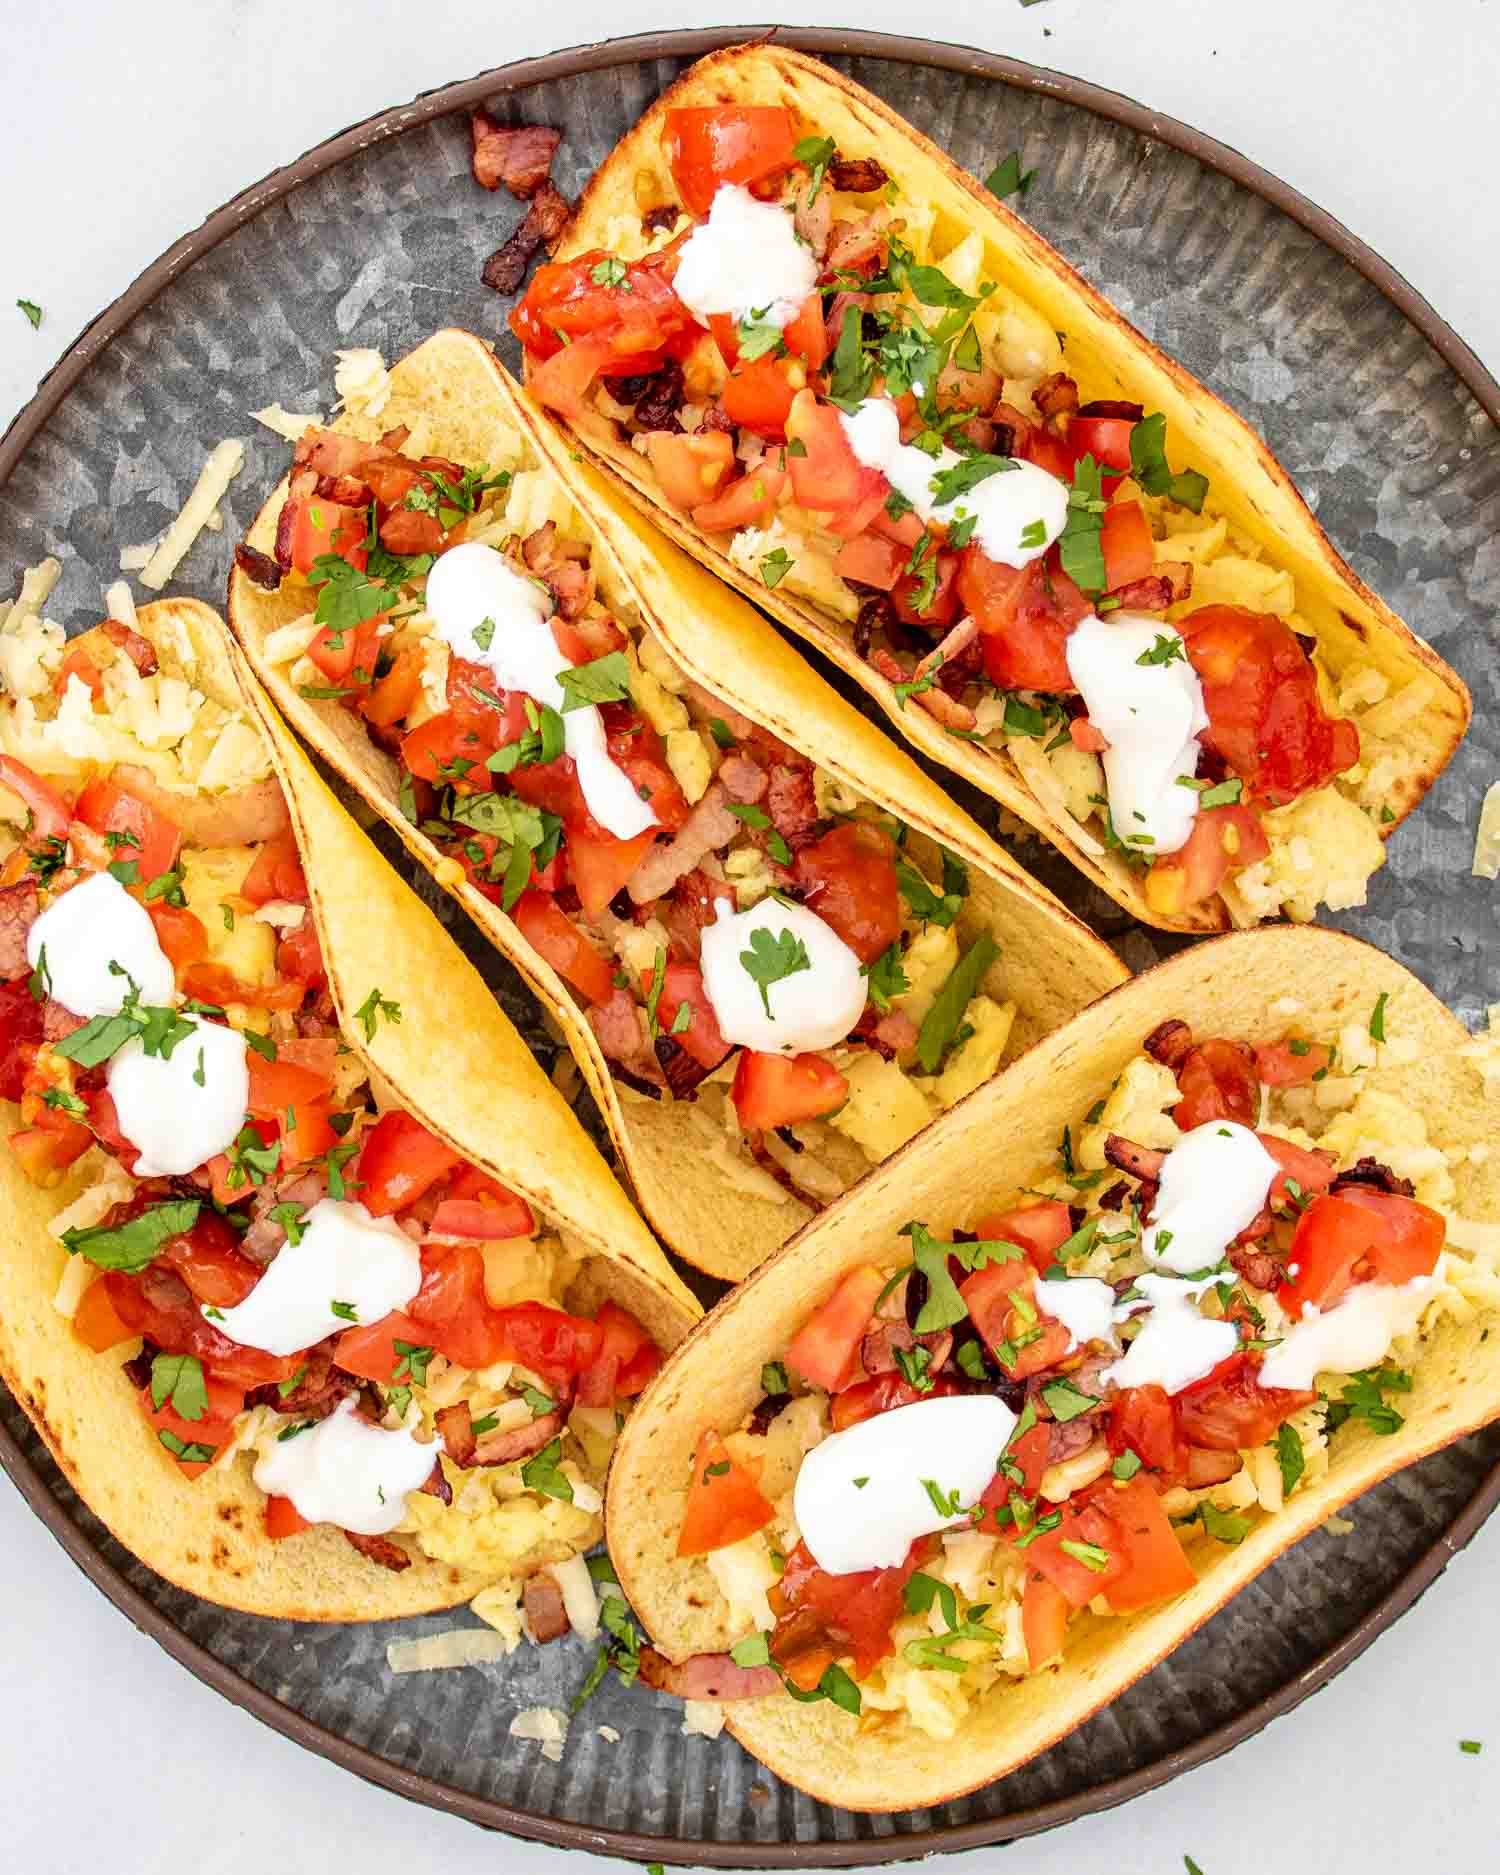 a plate with 4 tacos garnished with sour cream, salsa and cilantro.